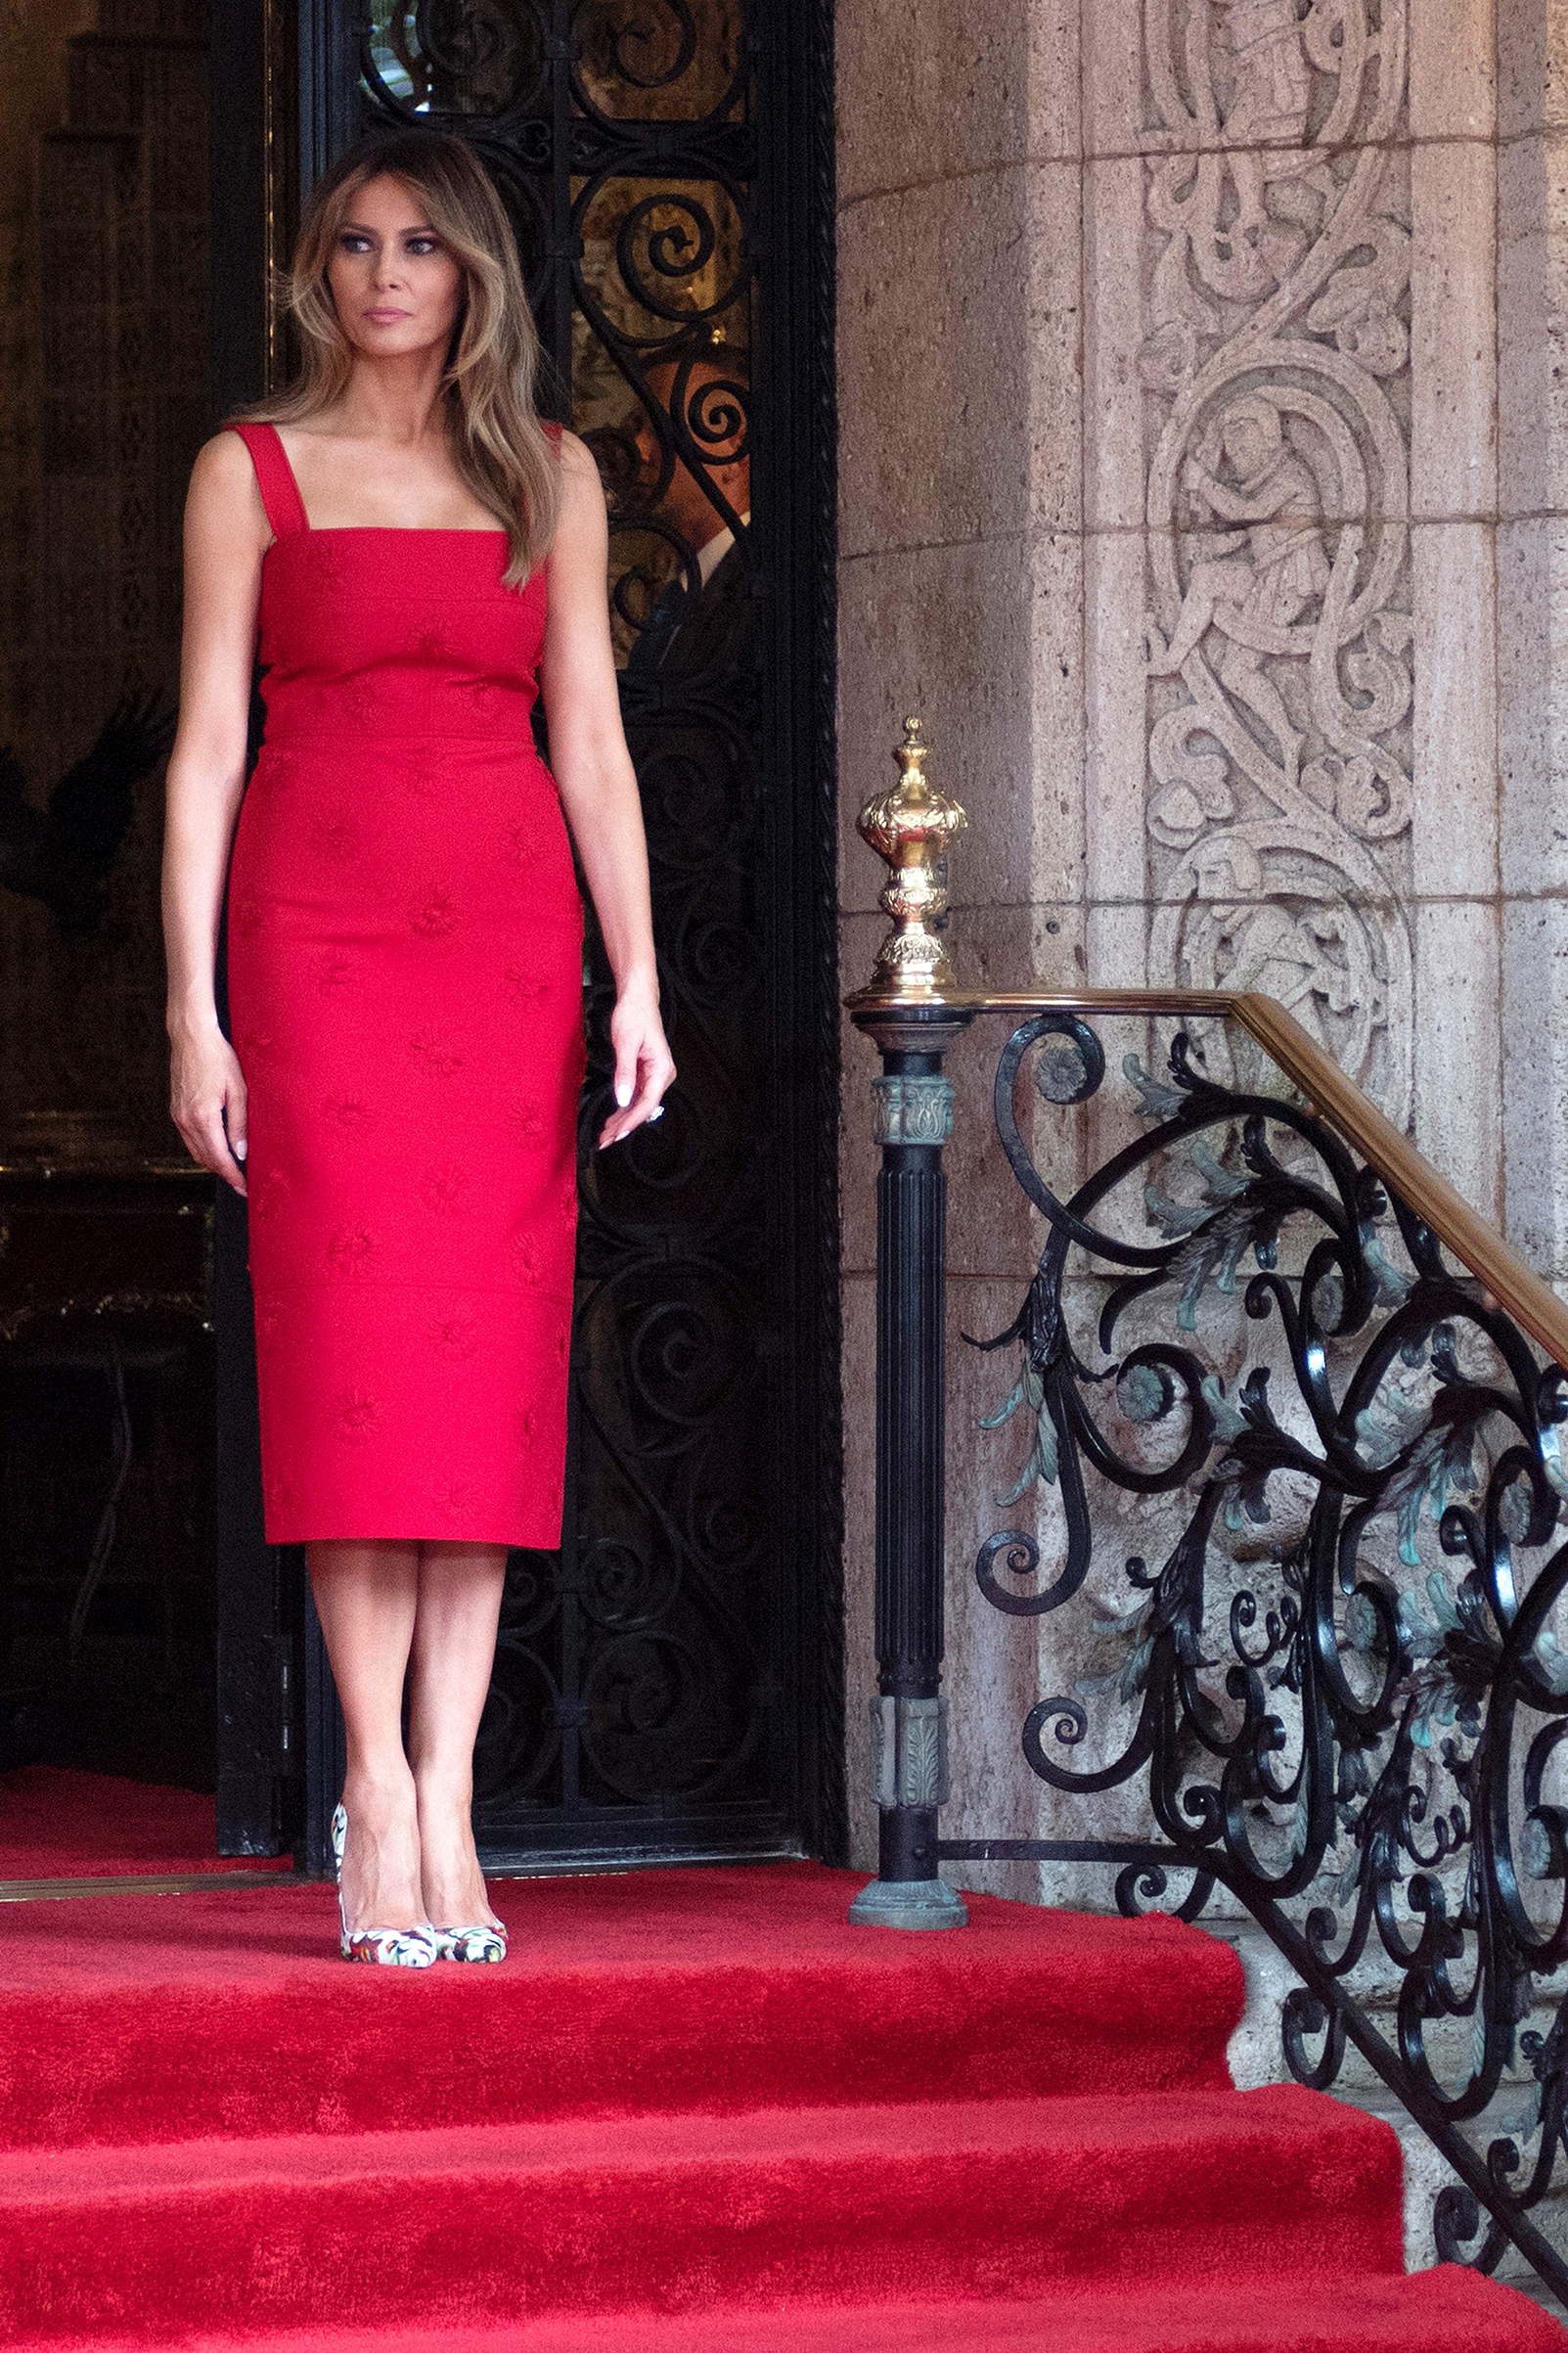 First lady Melania Trump wears a sleeveless red daisy-appliqué crepe midi dress by Valentino, awaits the arrival of Chinese President Xi Jinping and his wife Peng Liyuan at the Mar-a-Lago estate in West Palm Beach, Florida, on April 6, 2017.